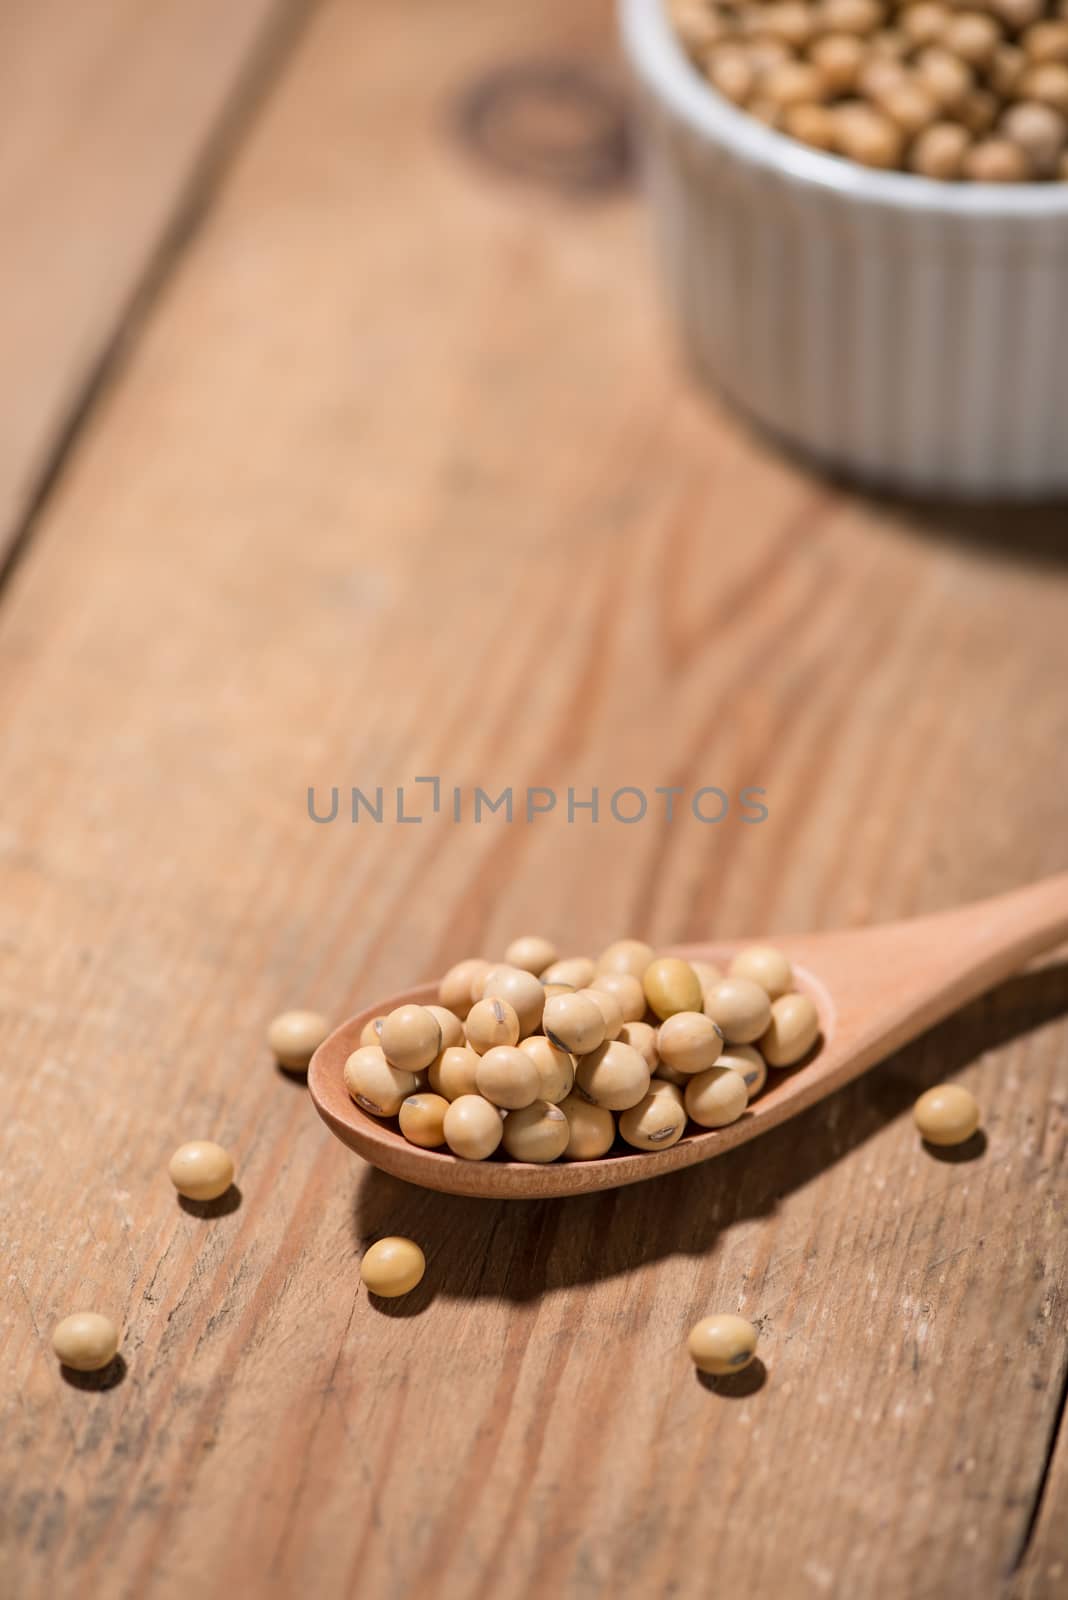 Soya beans in spoon on wooden table. by makidotvn